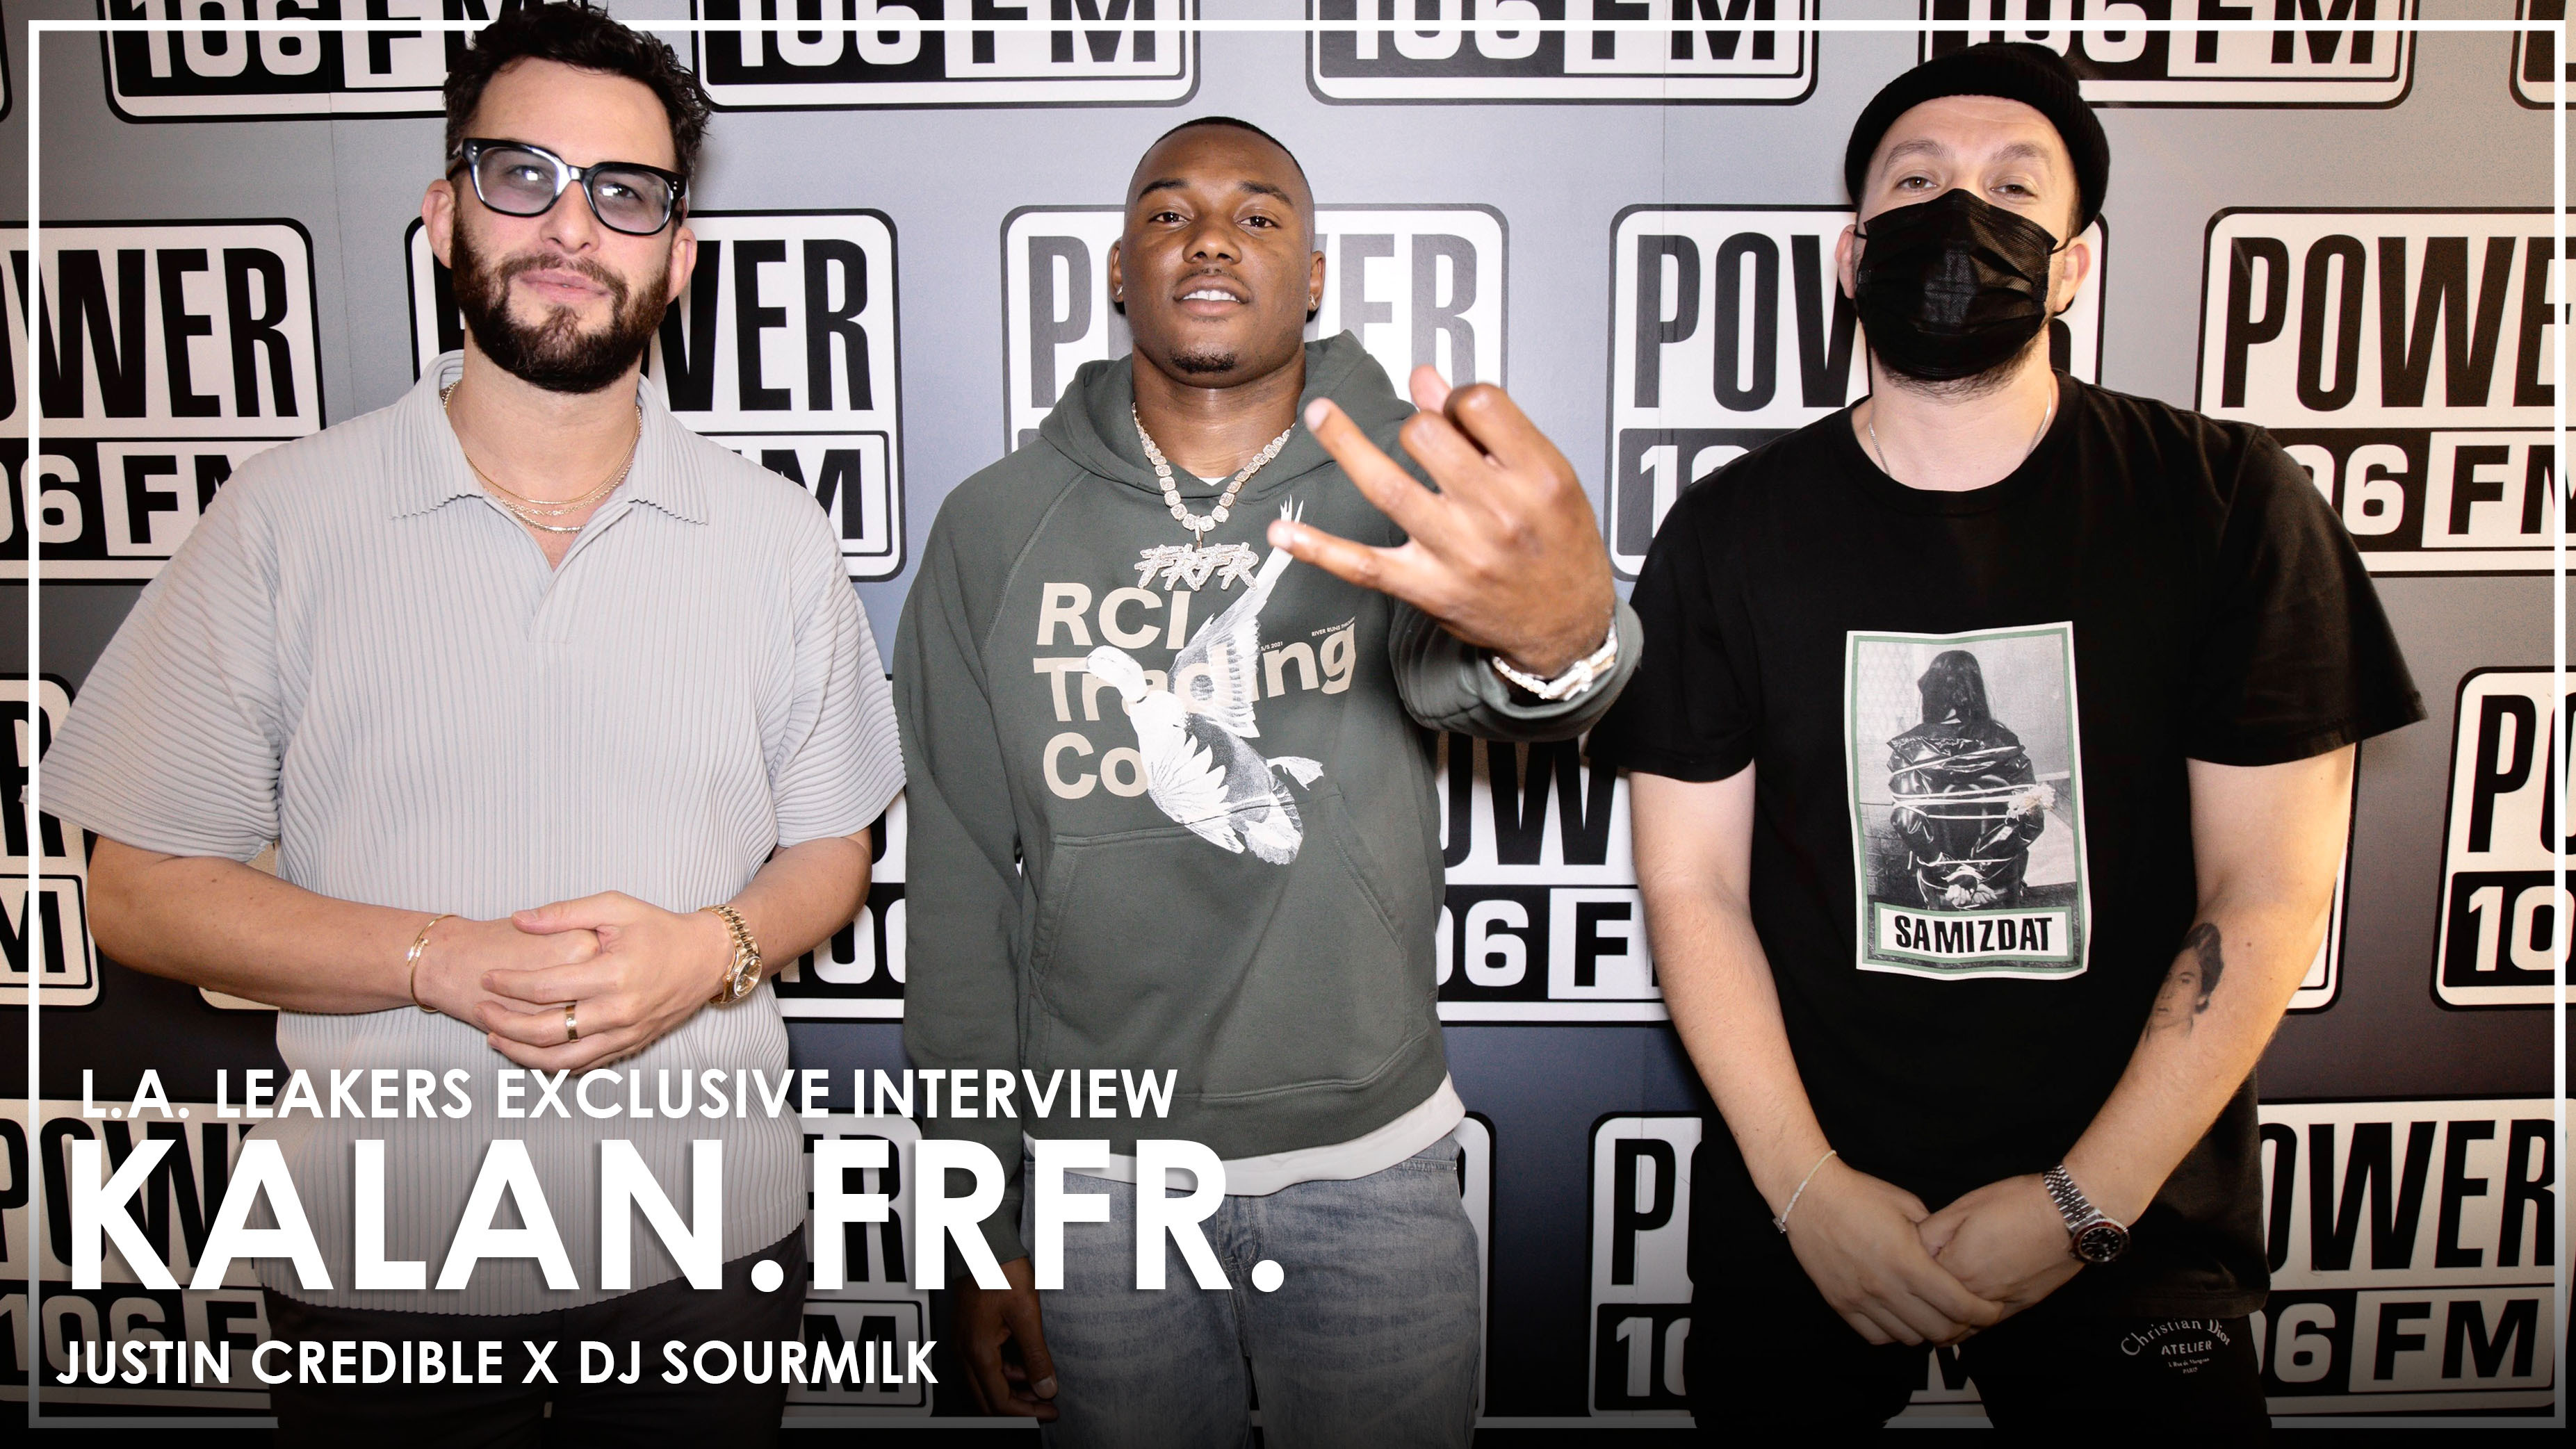 KALAN.FRFR. Speaks On L.A. Artists Sticking Together & Gratitude He Feels As A Roc Nation Signee